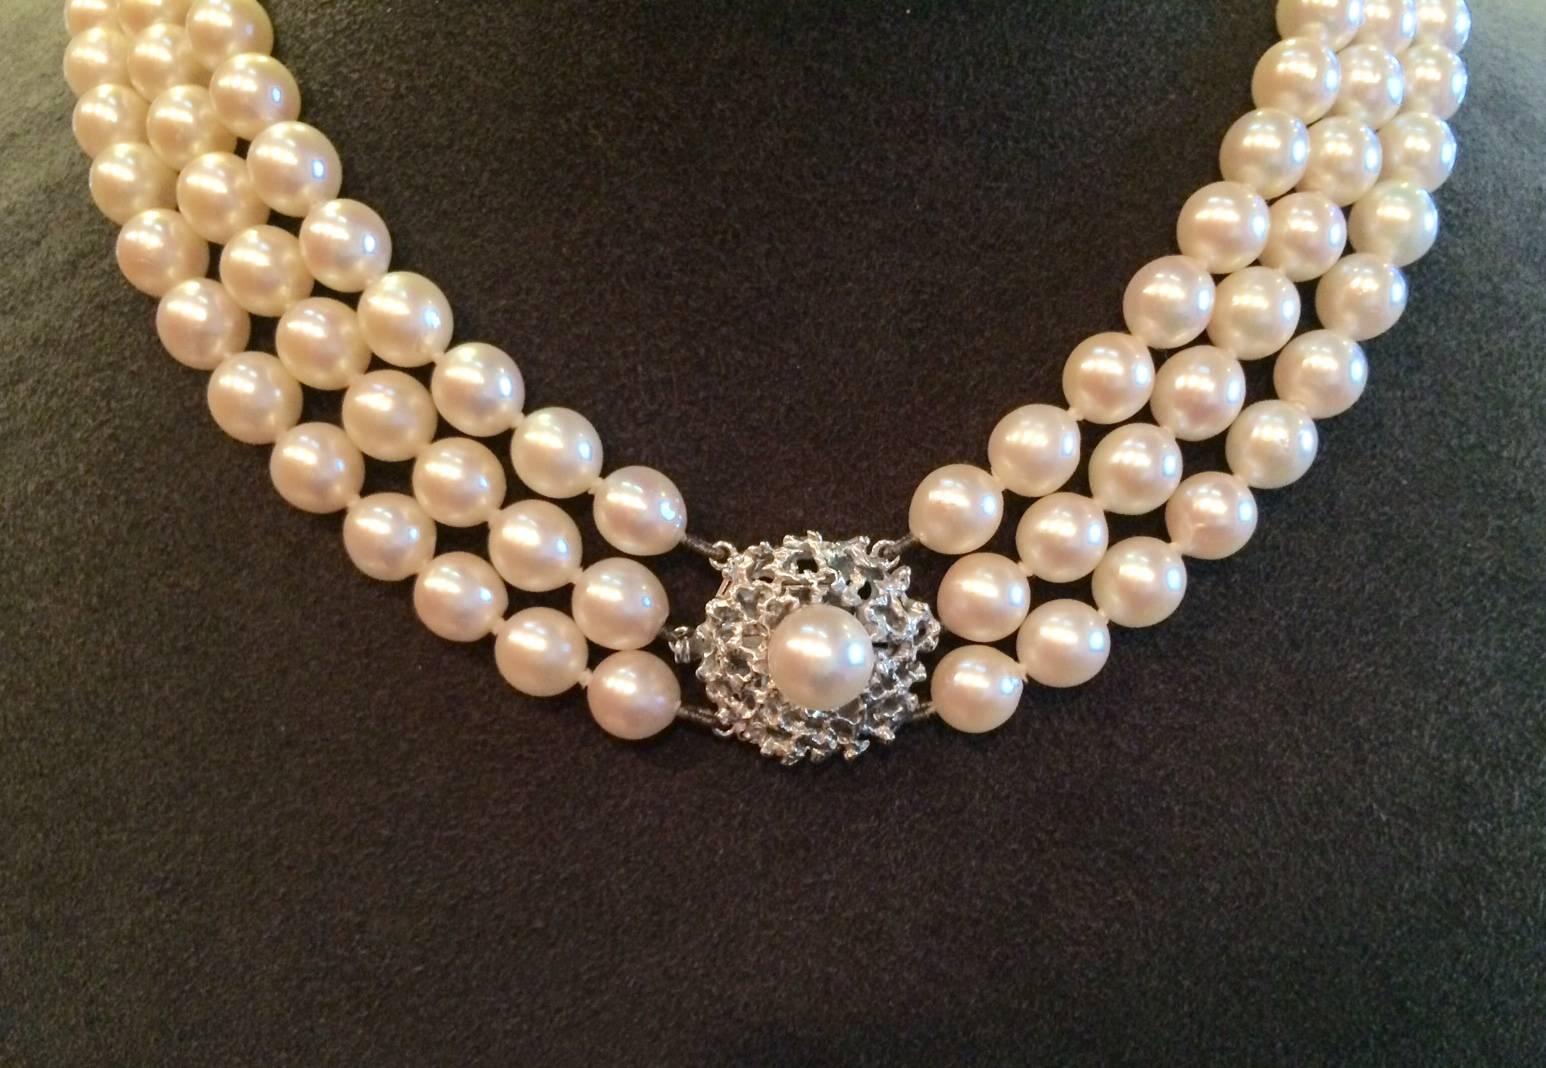 Triple strand pearl necklace with fancy designed 18kt white gold clasp and safety clasp. White pearls are 6.5-7mm in size making this a beautiful necklace that can be worn day or night.  Clasp is a unique feature that can be worn either on front or